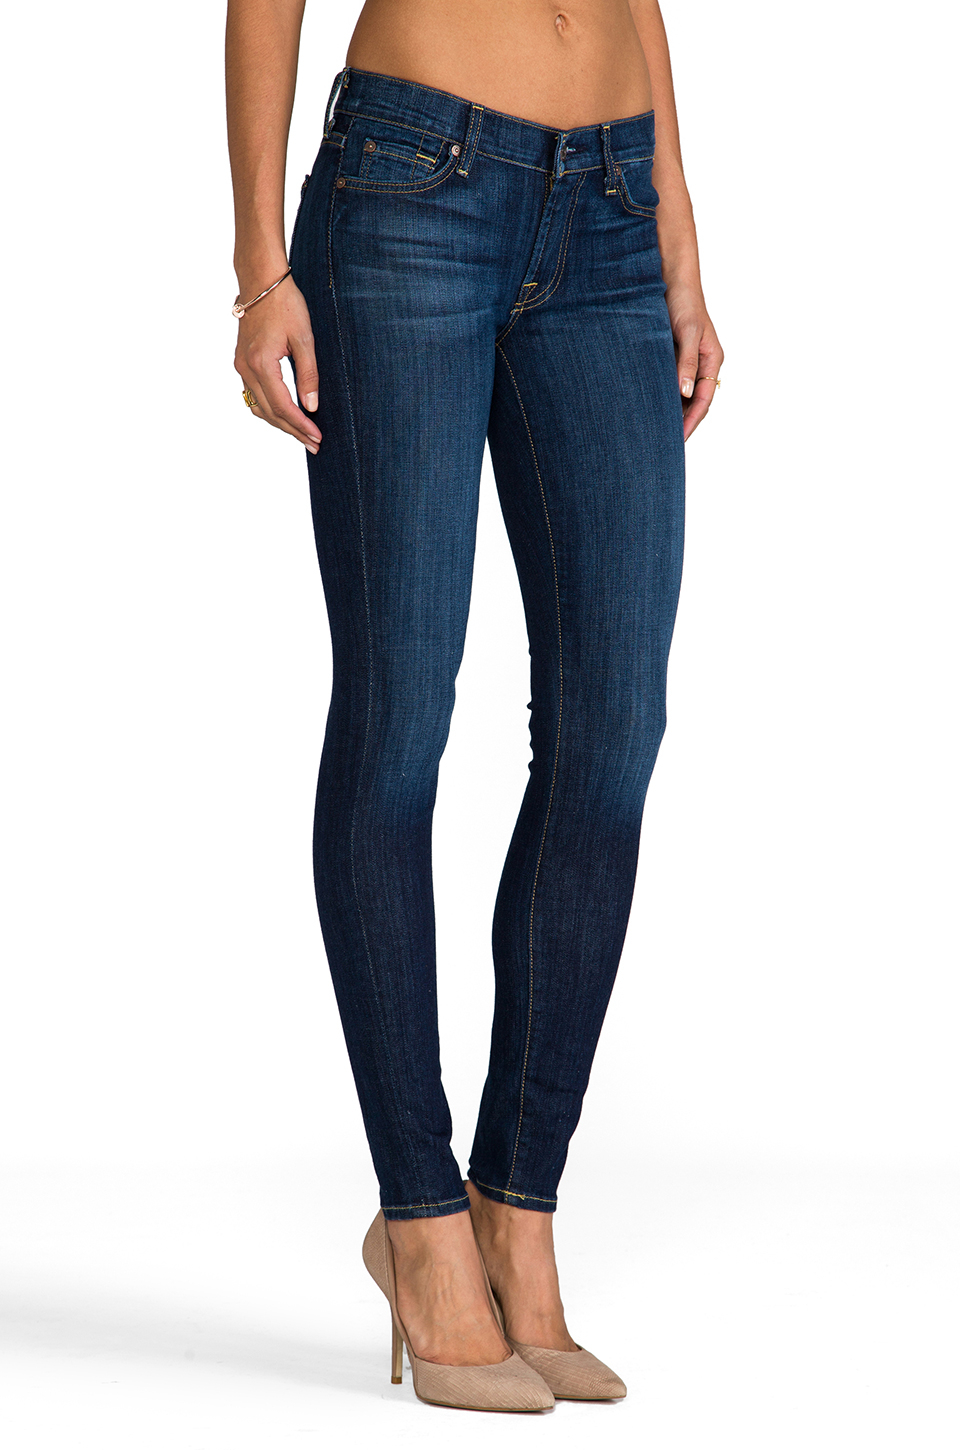 Lyst - 7 For All Mankind The Skinny in Blue